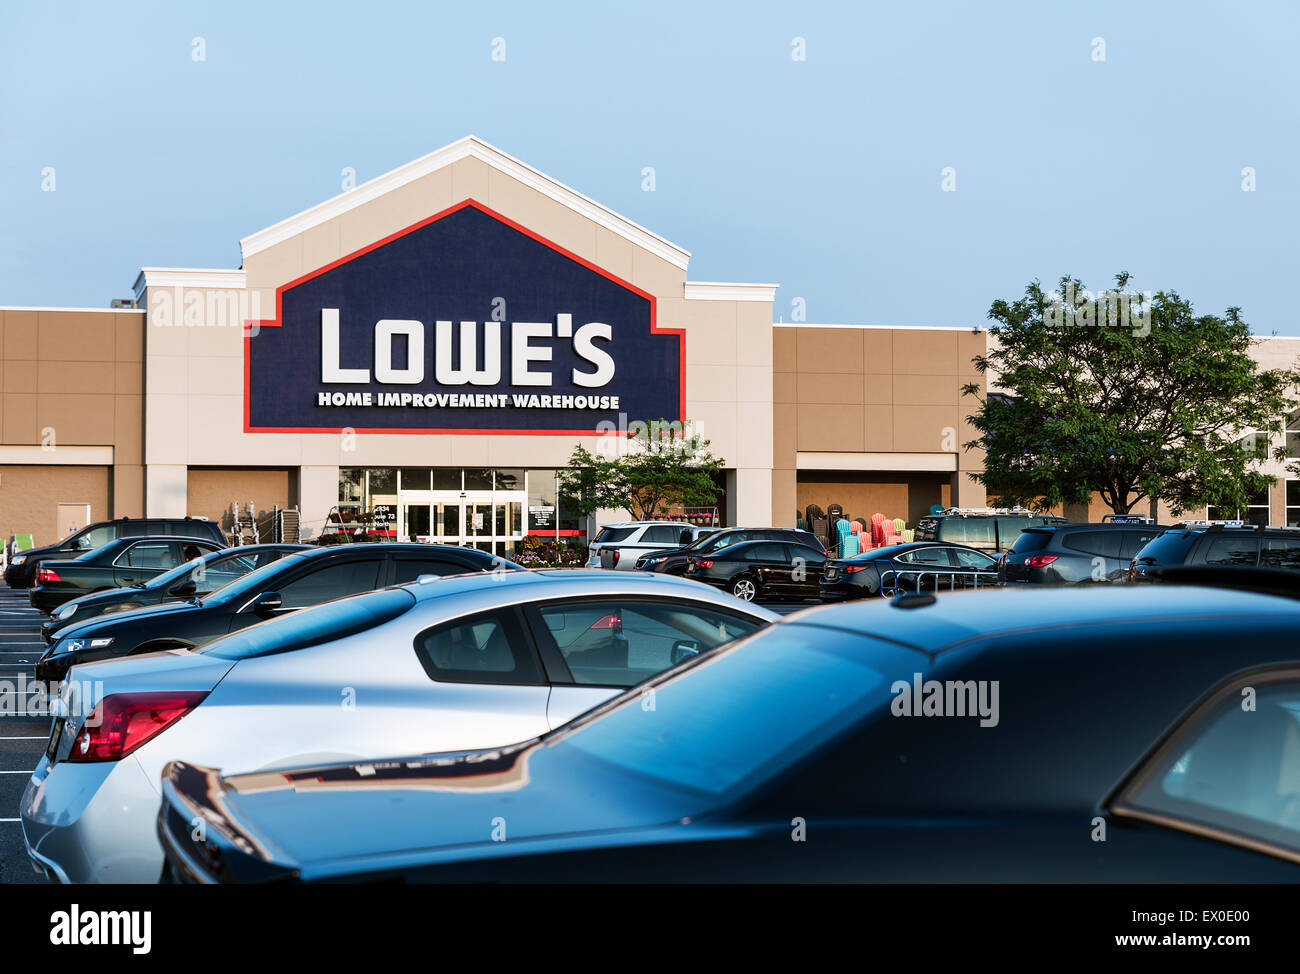 Lowe home improvement superstore. Foto Stock